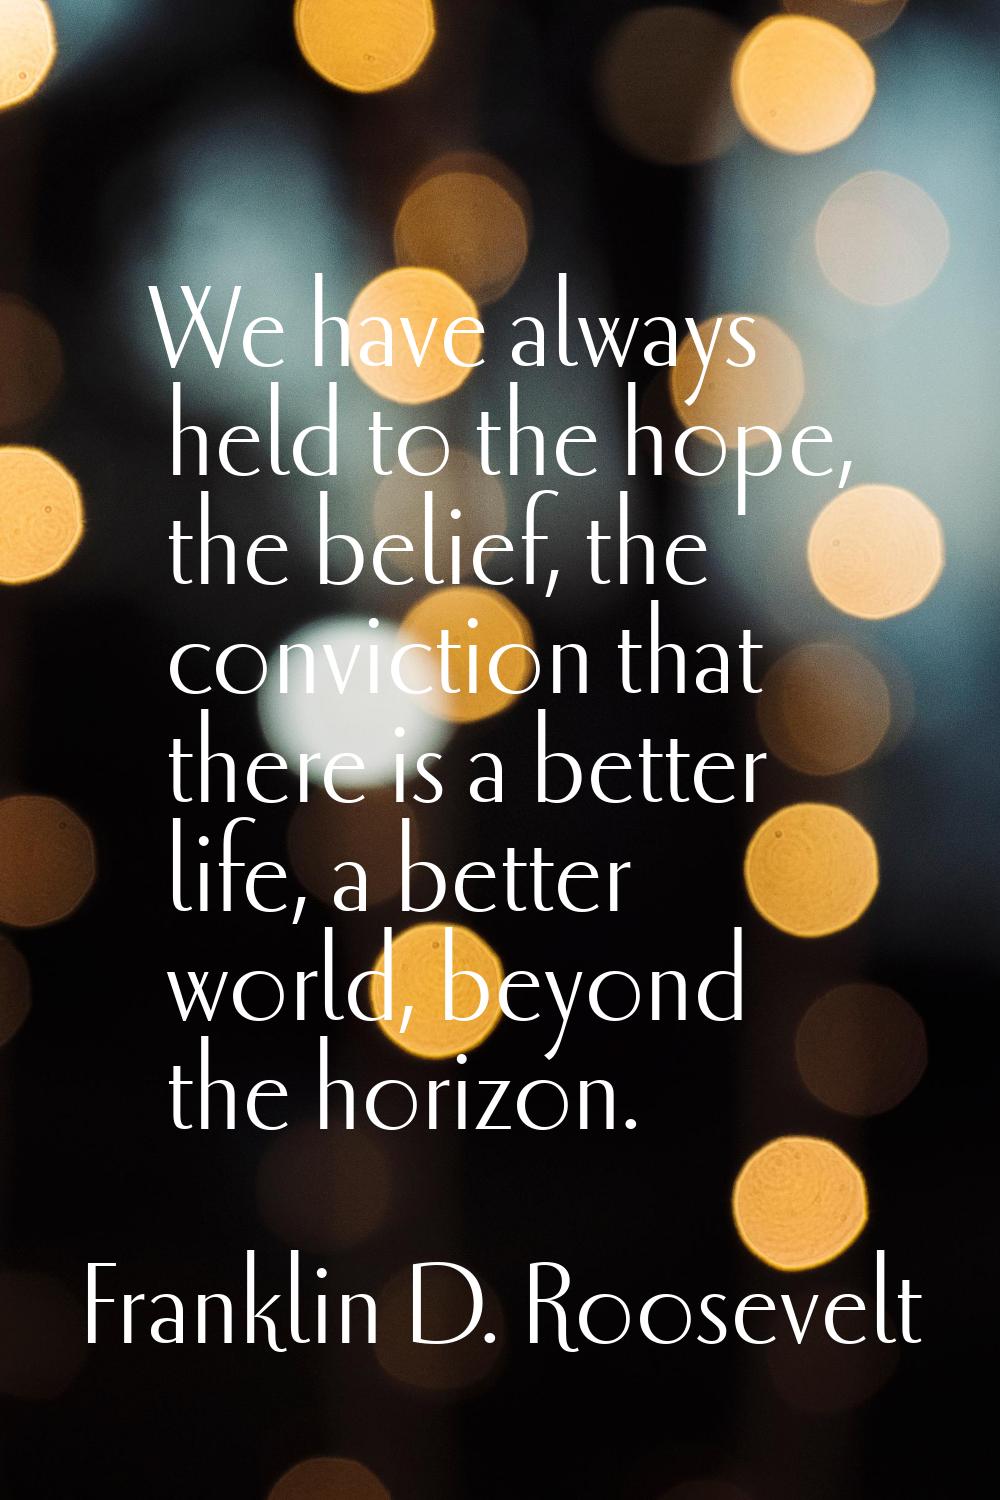 We have always held to the hope, the belief, the conviction that there is a better life, a better w